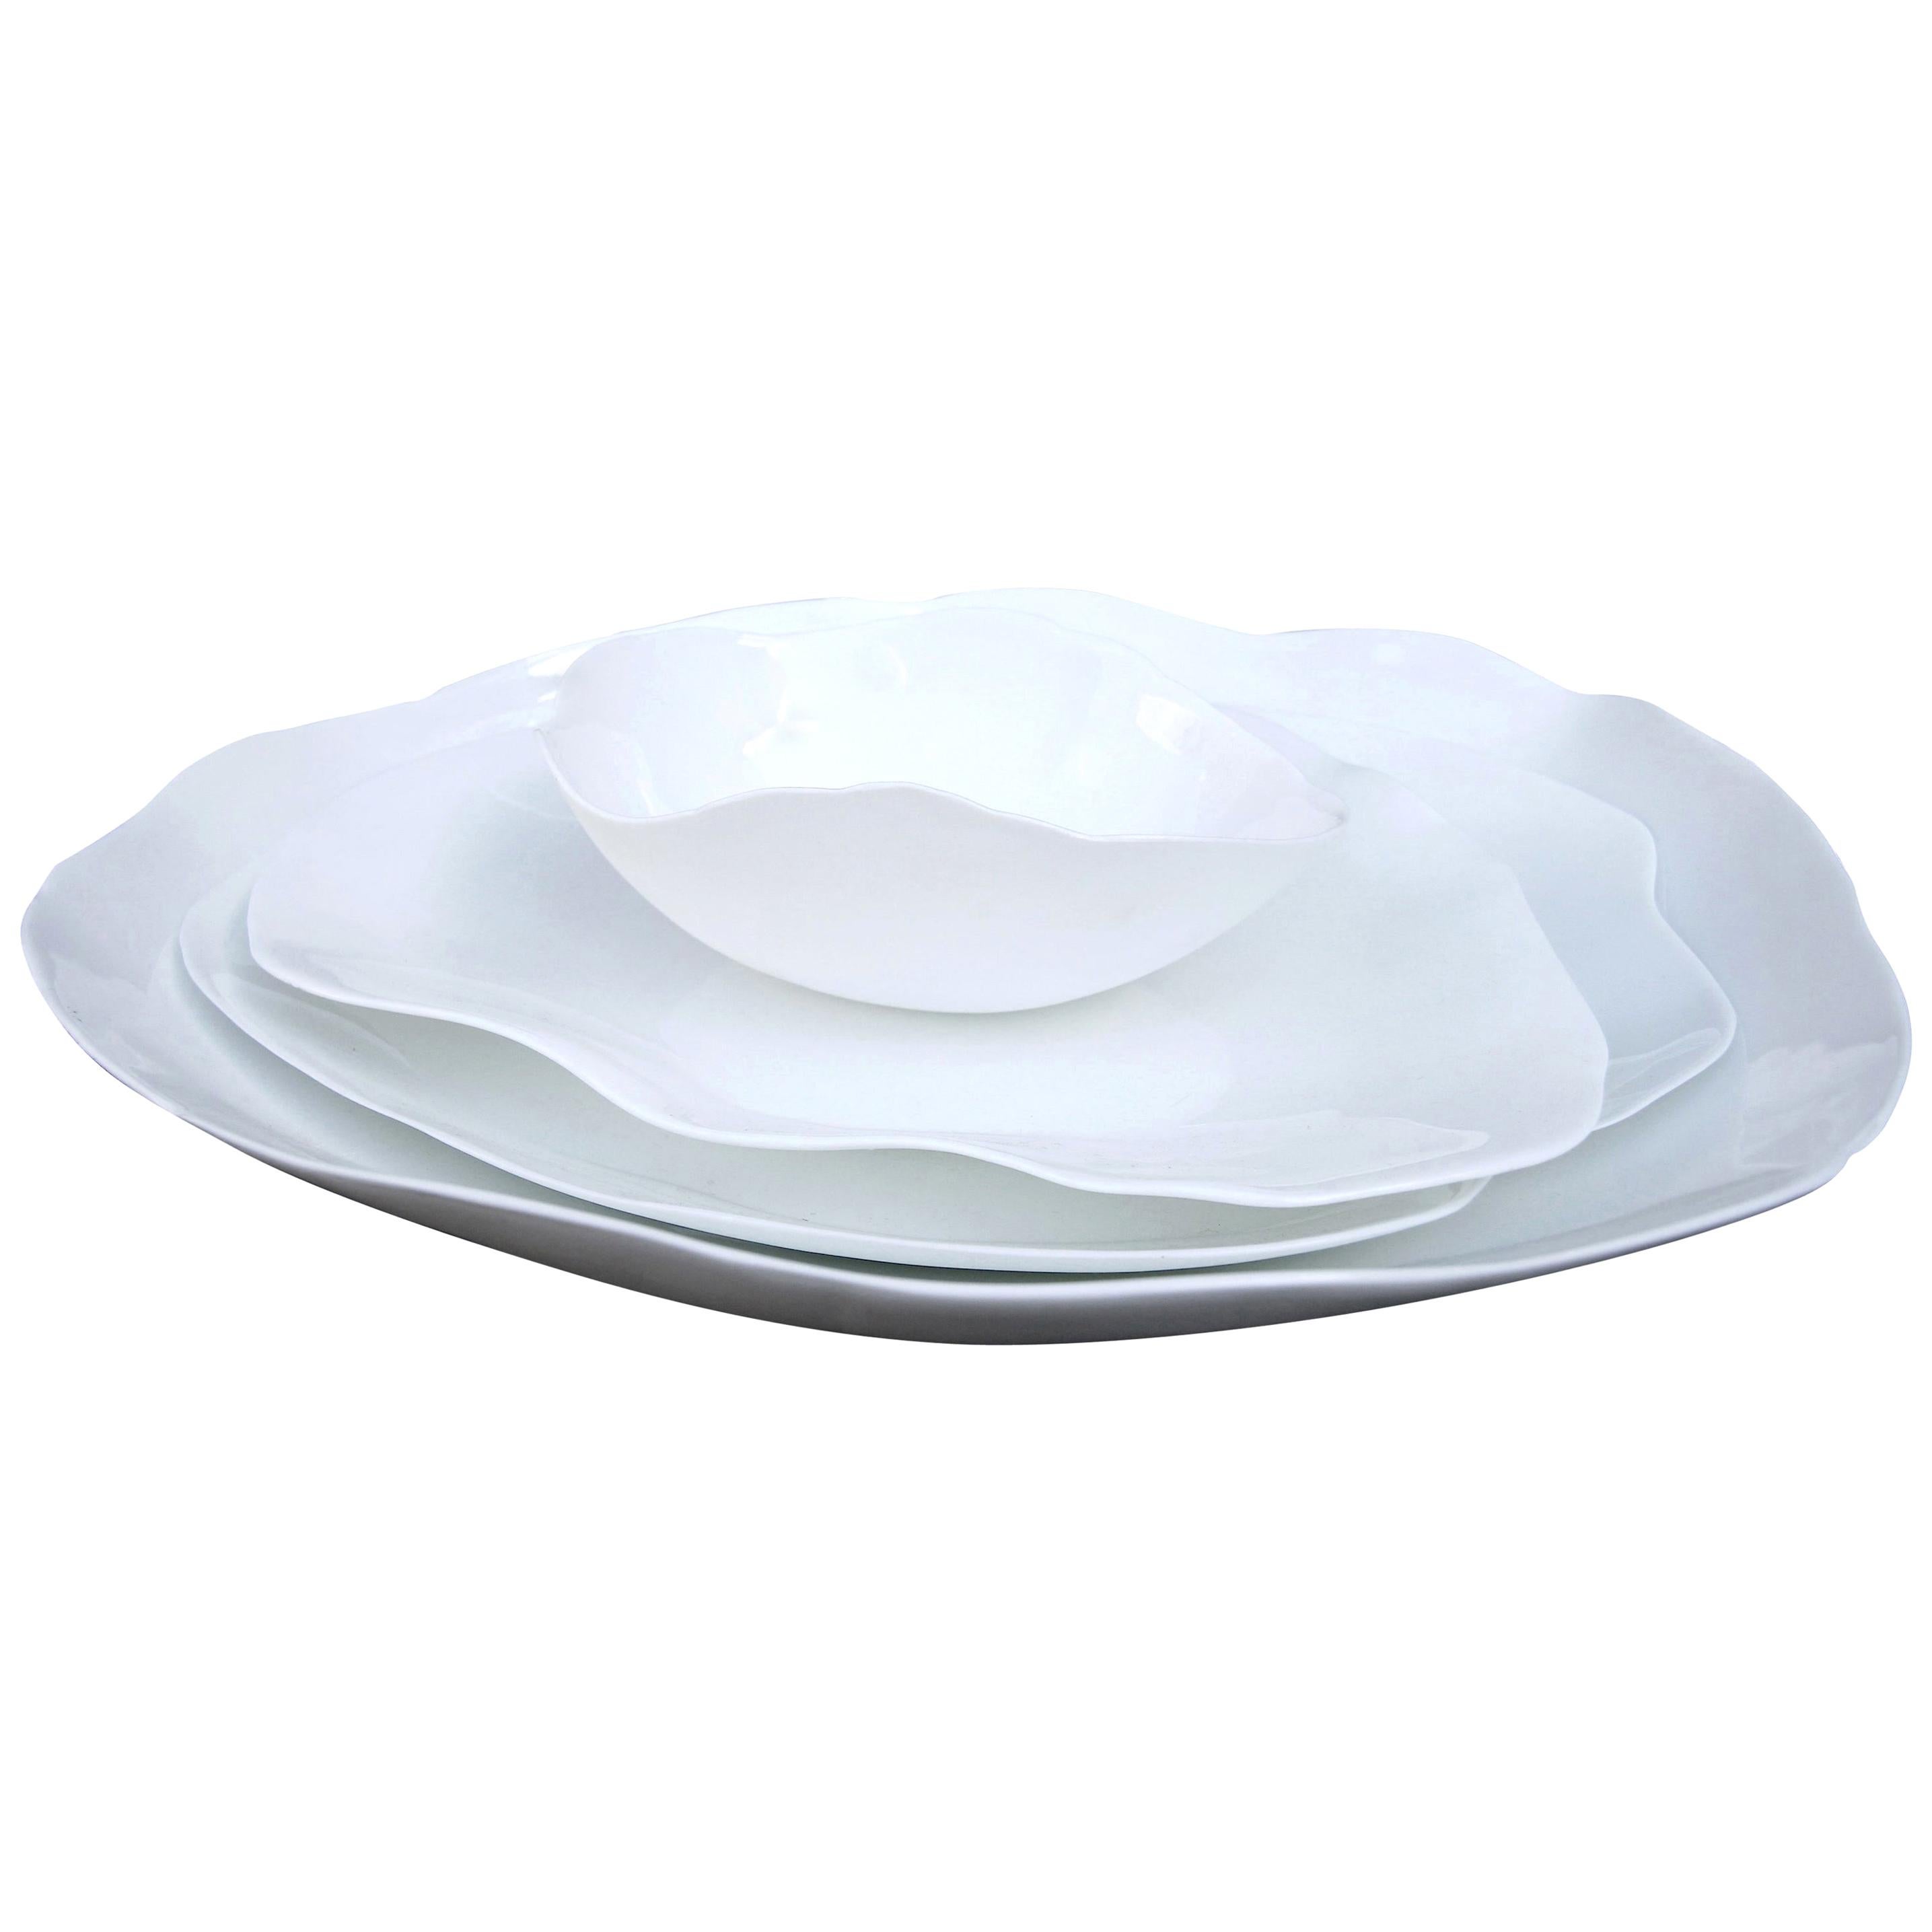 Perfect Imperfection White Bone China Plates and Bowl